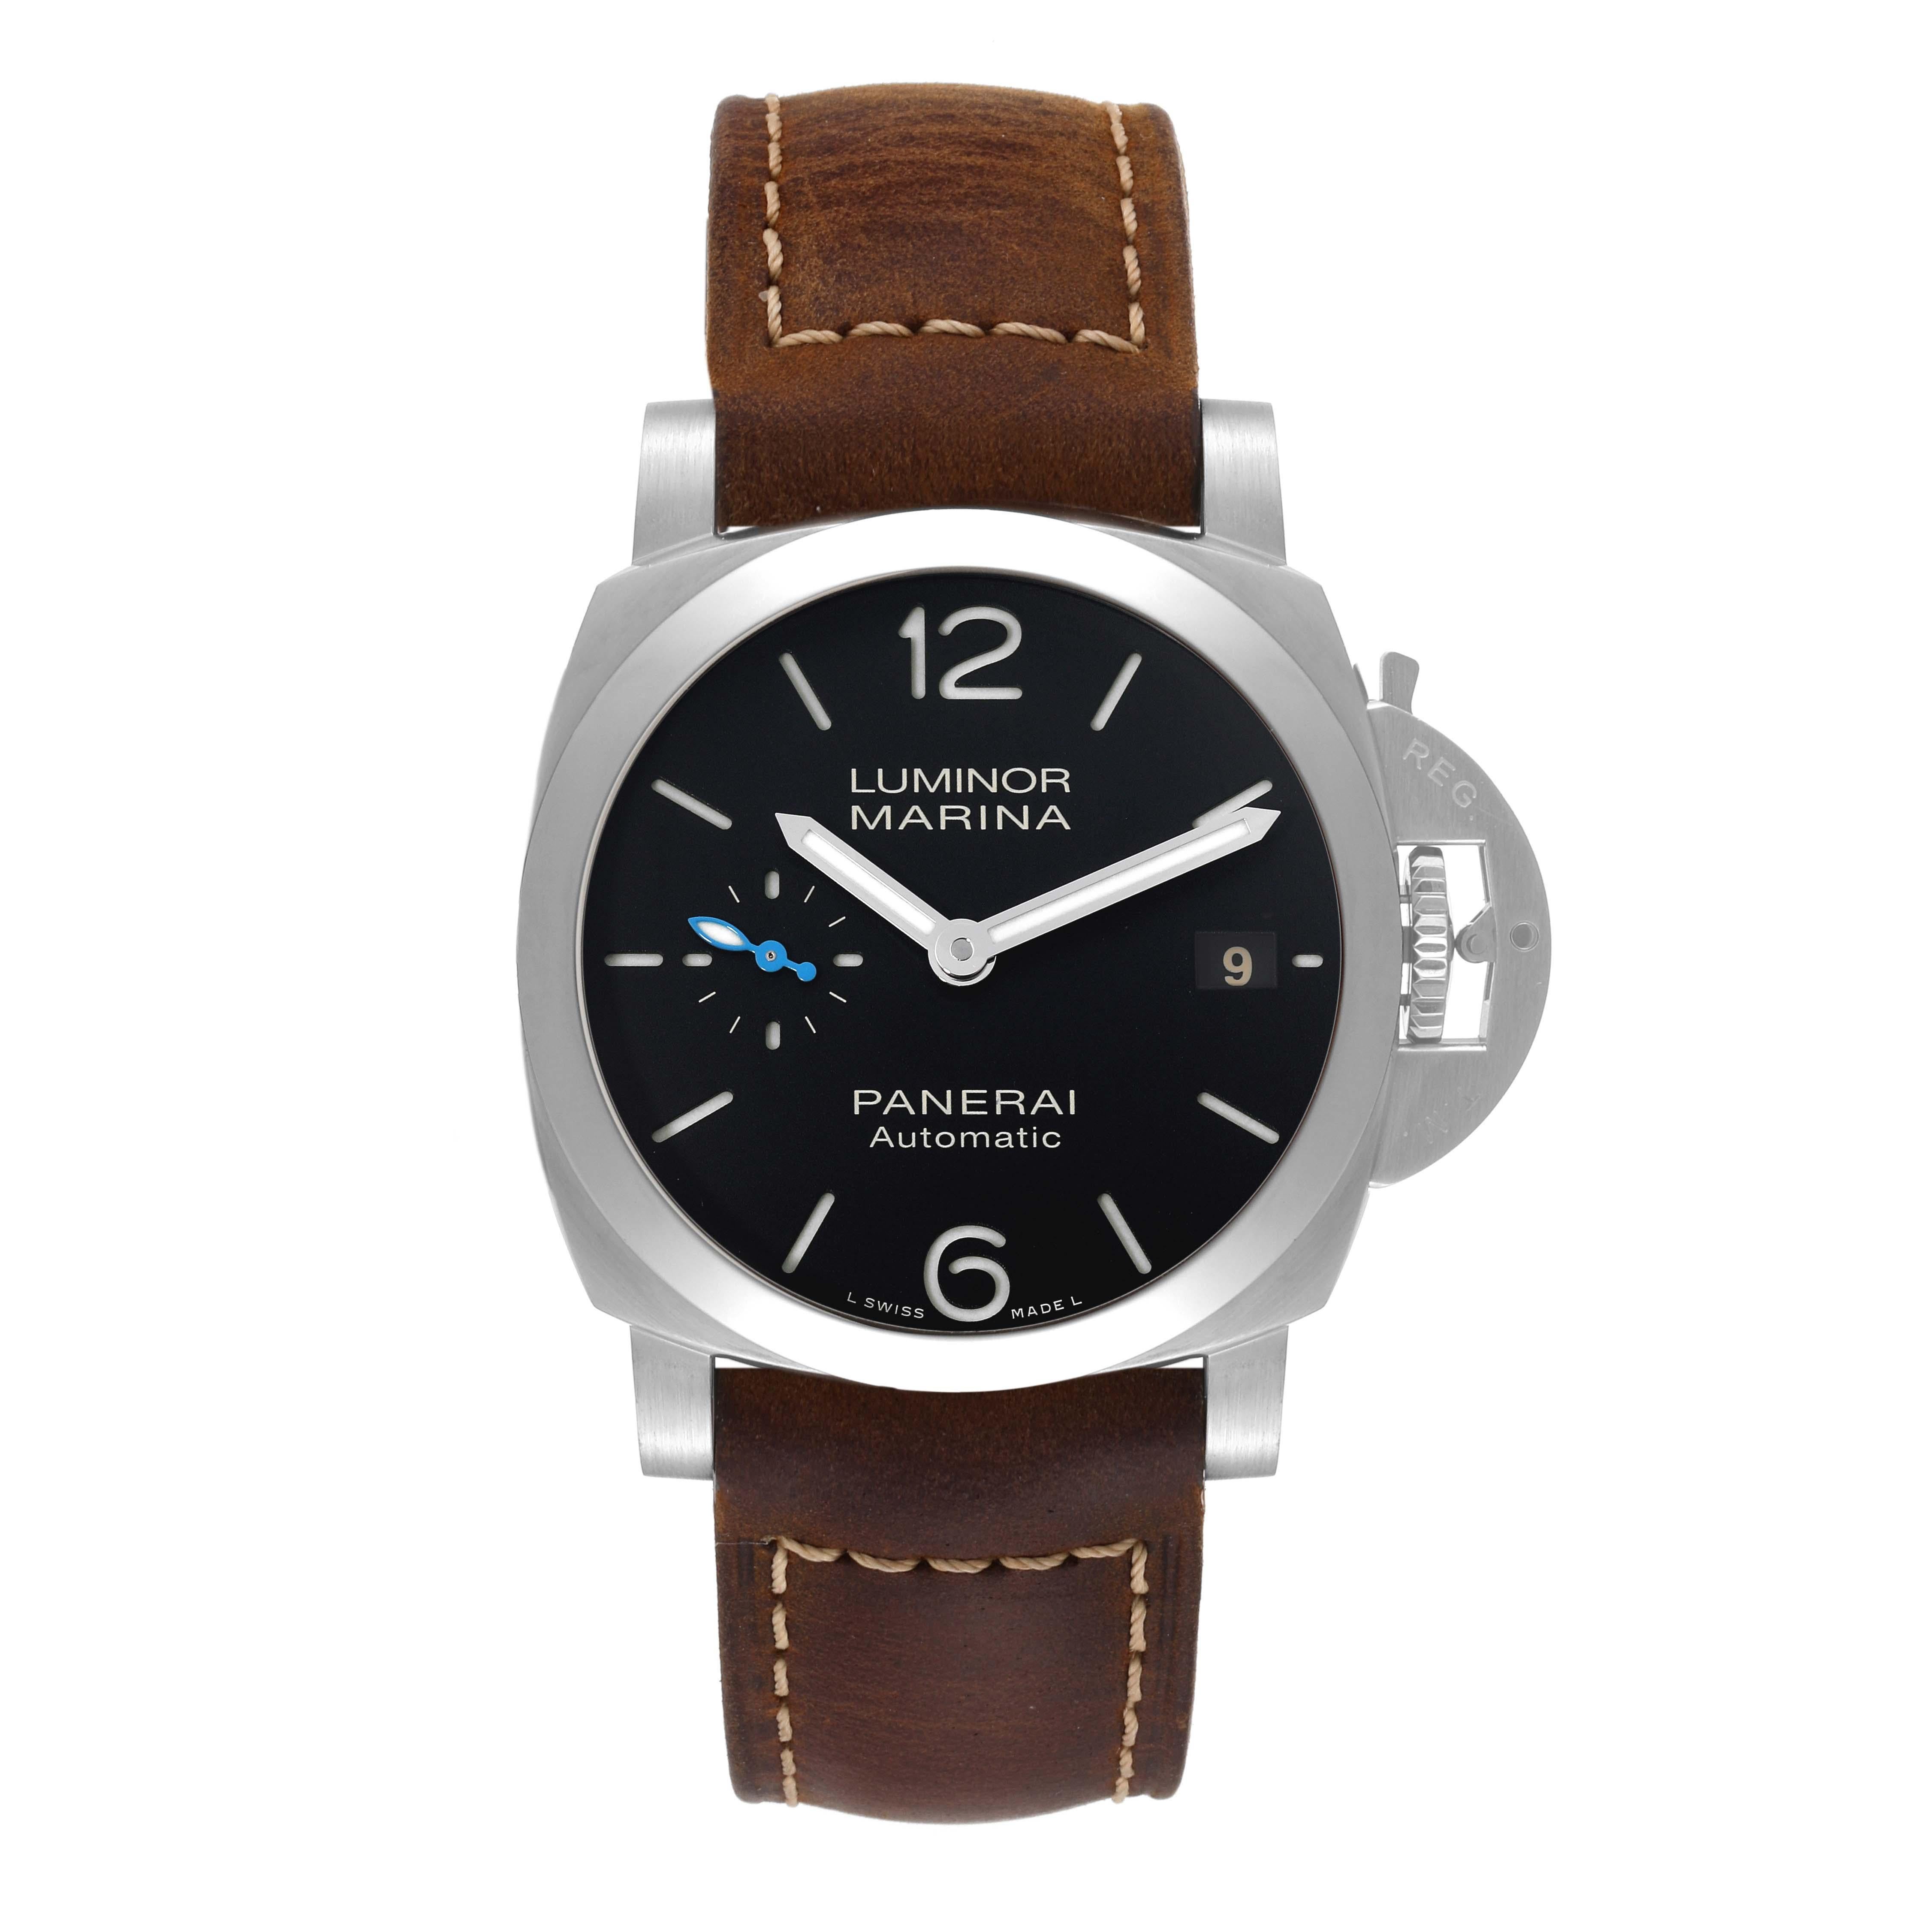 Panerai Luminor Marina Quaranta Steel Mens Watch PAM01272 Box Card. Automatic self-winding movement. Brushed stainless steel cushion case 40mm in diameter. Panerai patented crown protector. Polished stainless steel smooth bezel. Scratch resistant